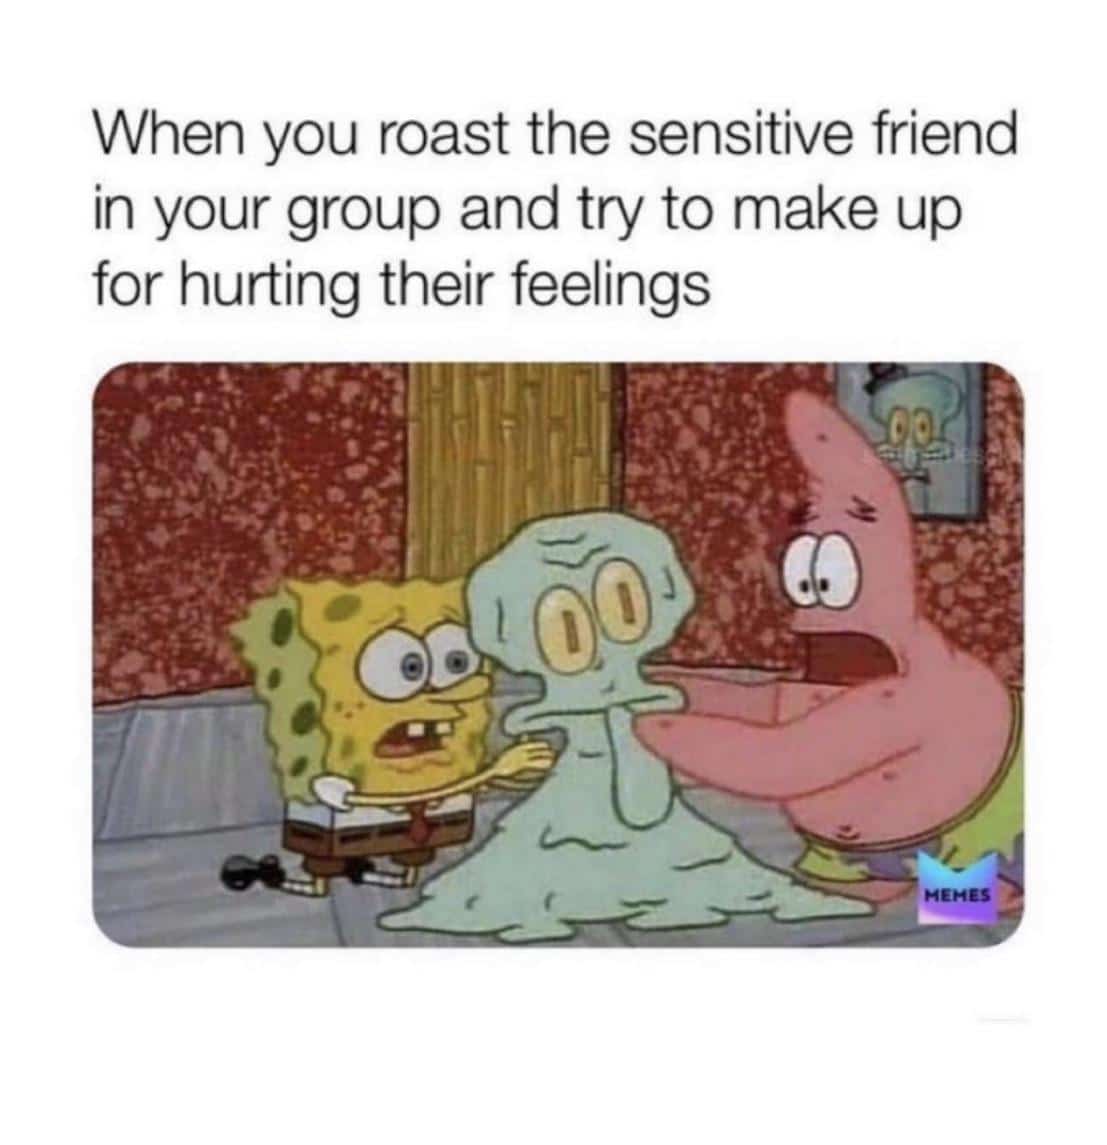 Spongebob, Fyi Spongebob Memes Spongebob, Fyi text: When you roast the sensitive friend in your group and try to make up for hurting their feelings 